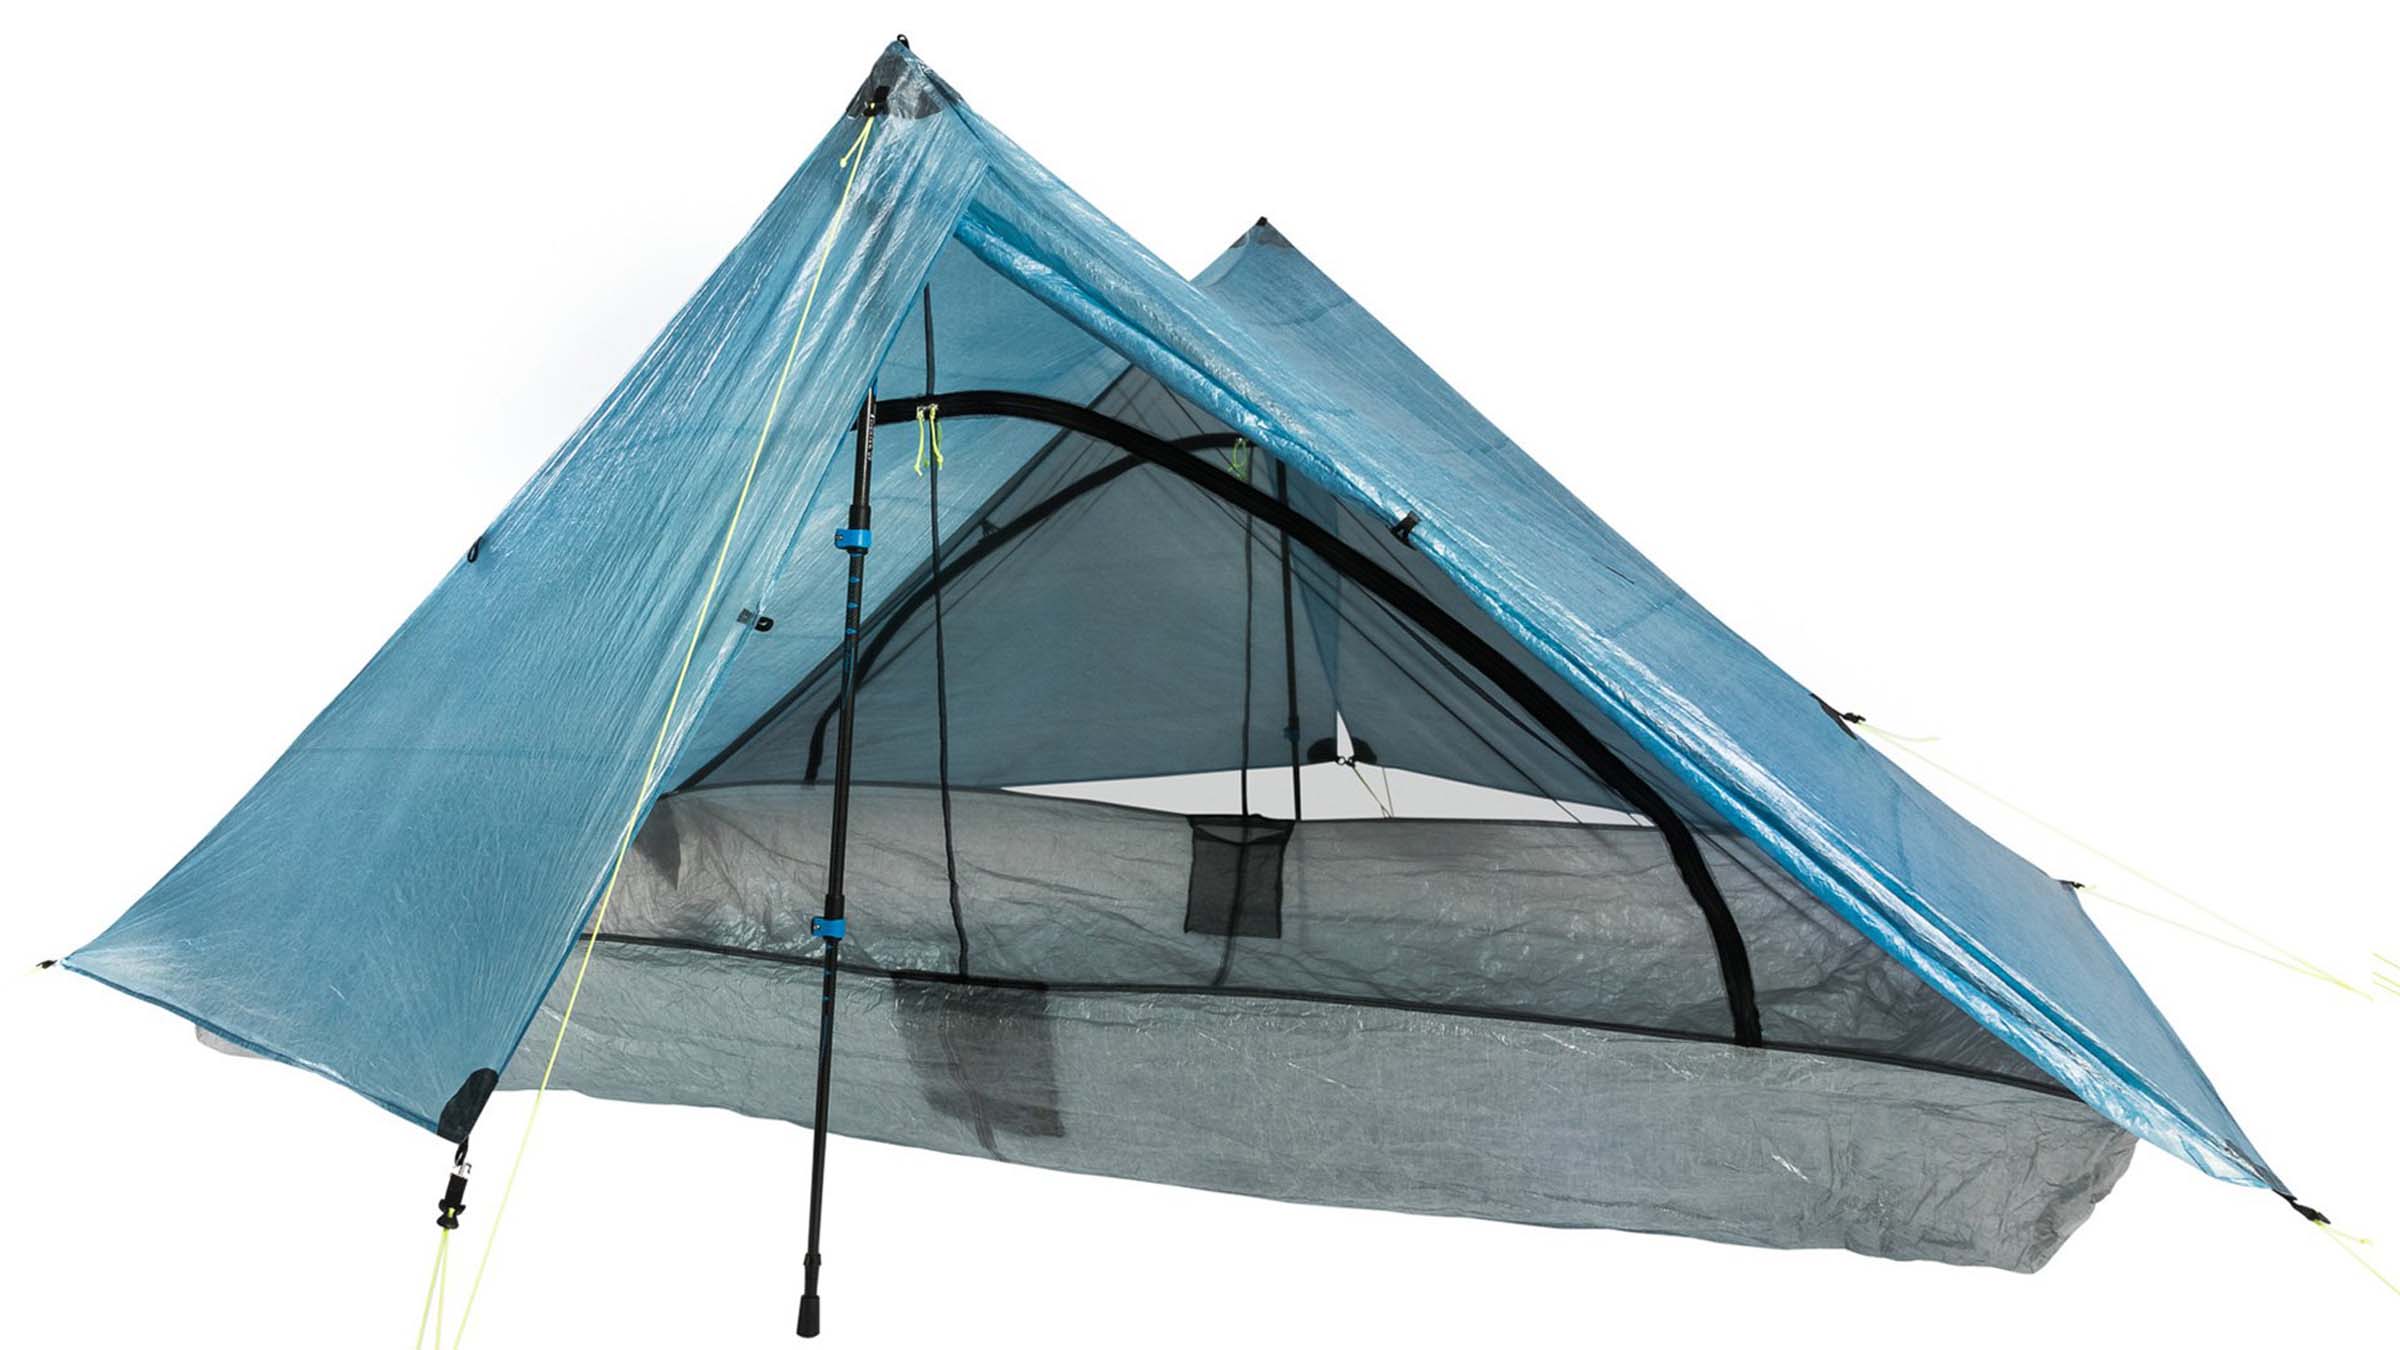 Wash Your Tent Like a Pro with Nikwax Tech Wash - Easy Cleaning